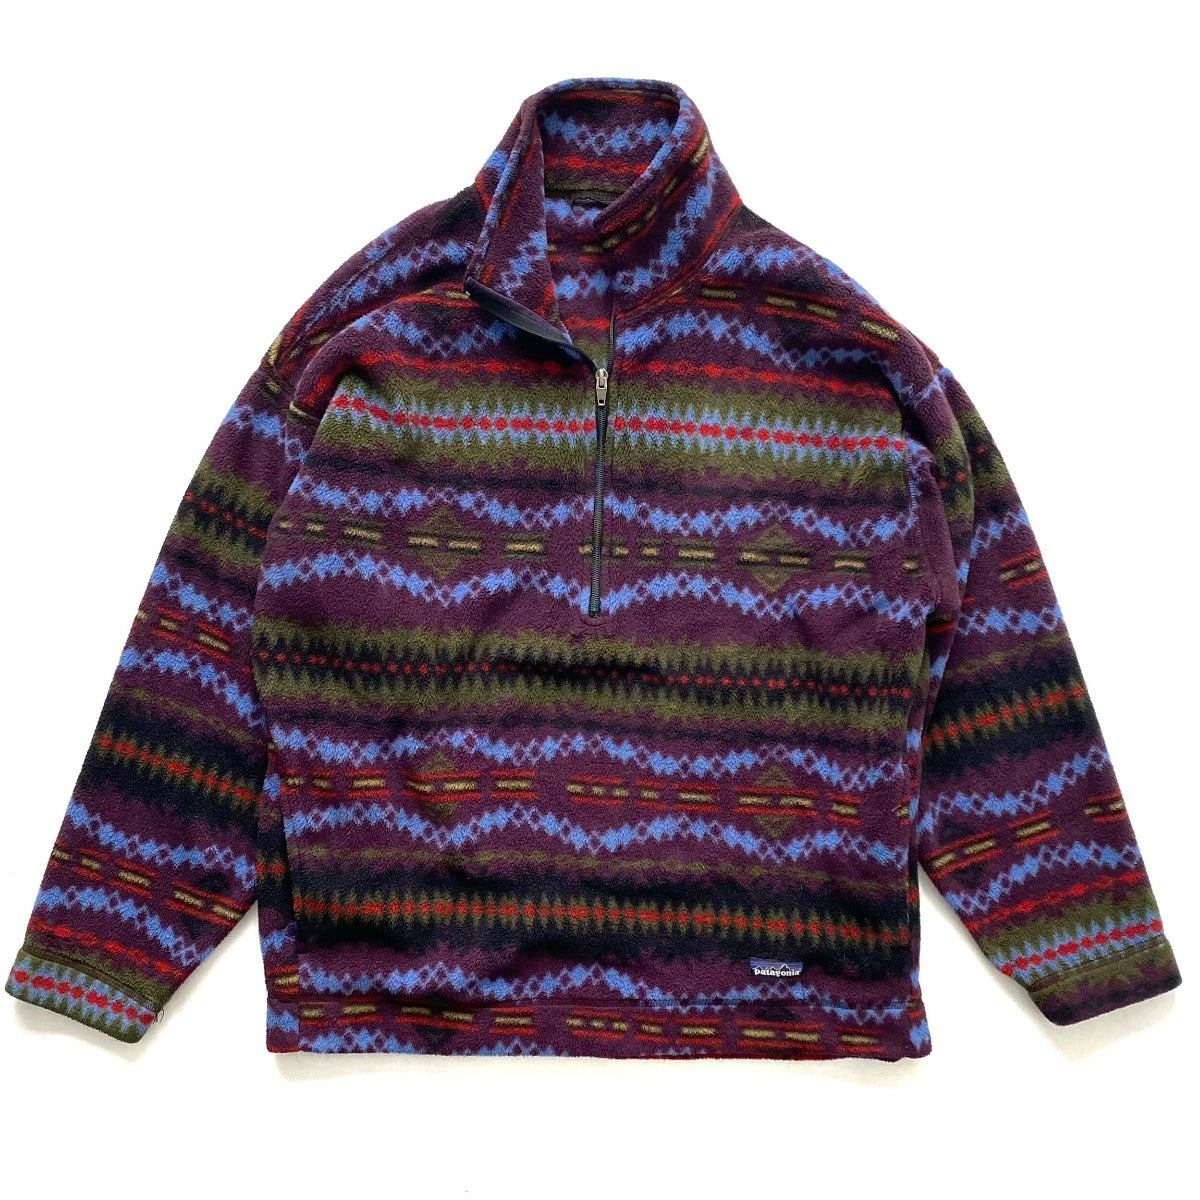 Vintage Patagonia Fall Pullover – Aztec 1994 The Fleece Synchilla Thirty-First